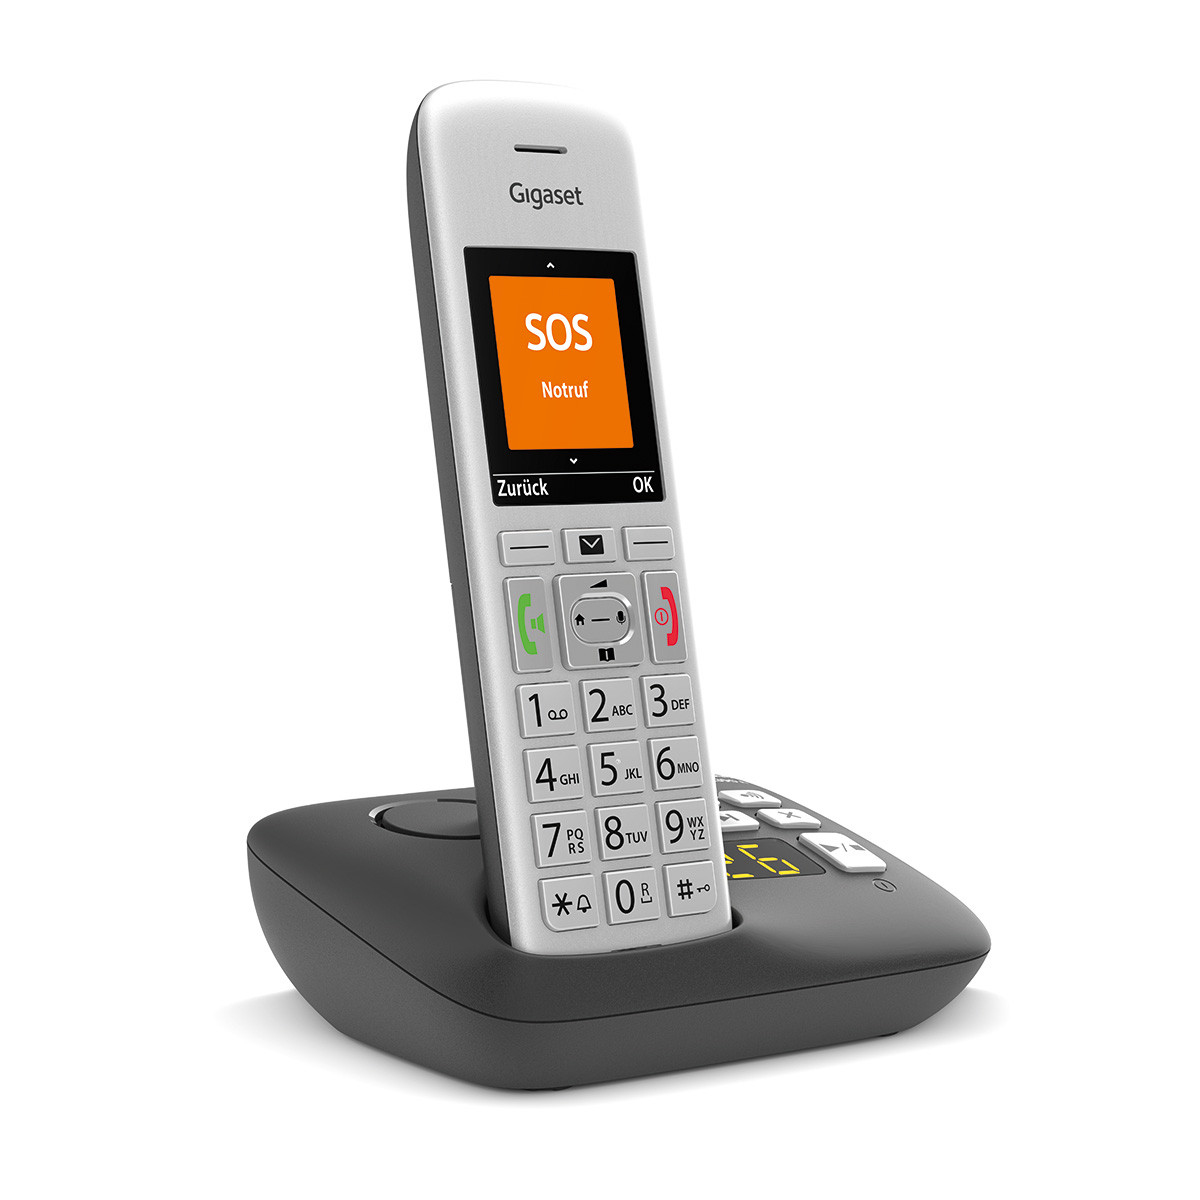 S30852-H2928-B104 UNIFY GIGASET OPENSTAGE E390A - DECT telephone - Wireless handset - 200 entries - Caller ID - Silver